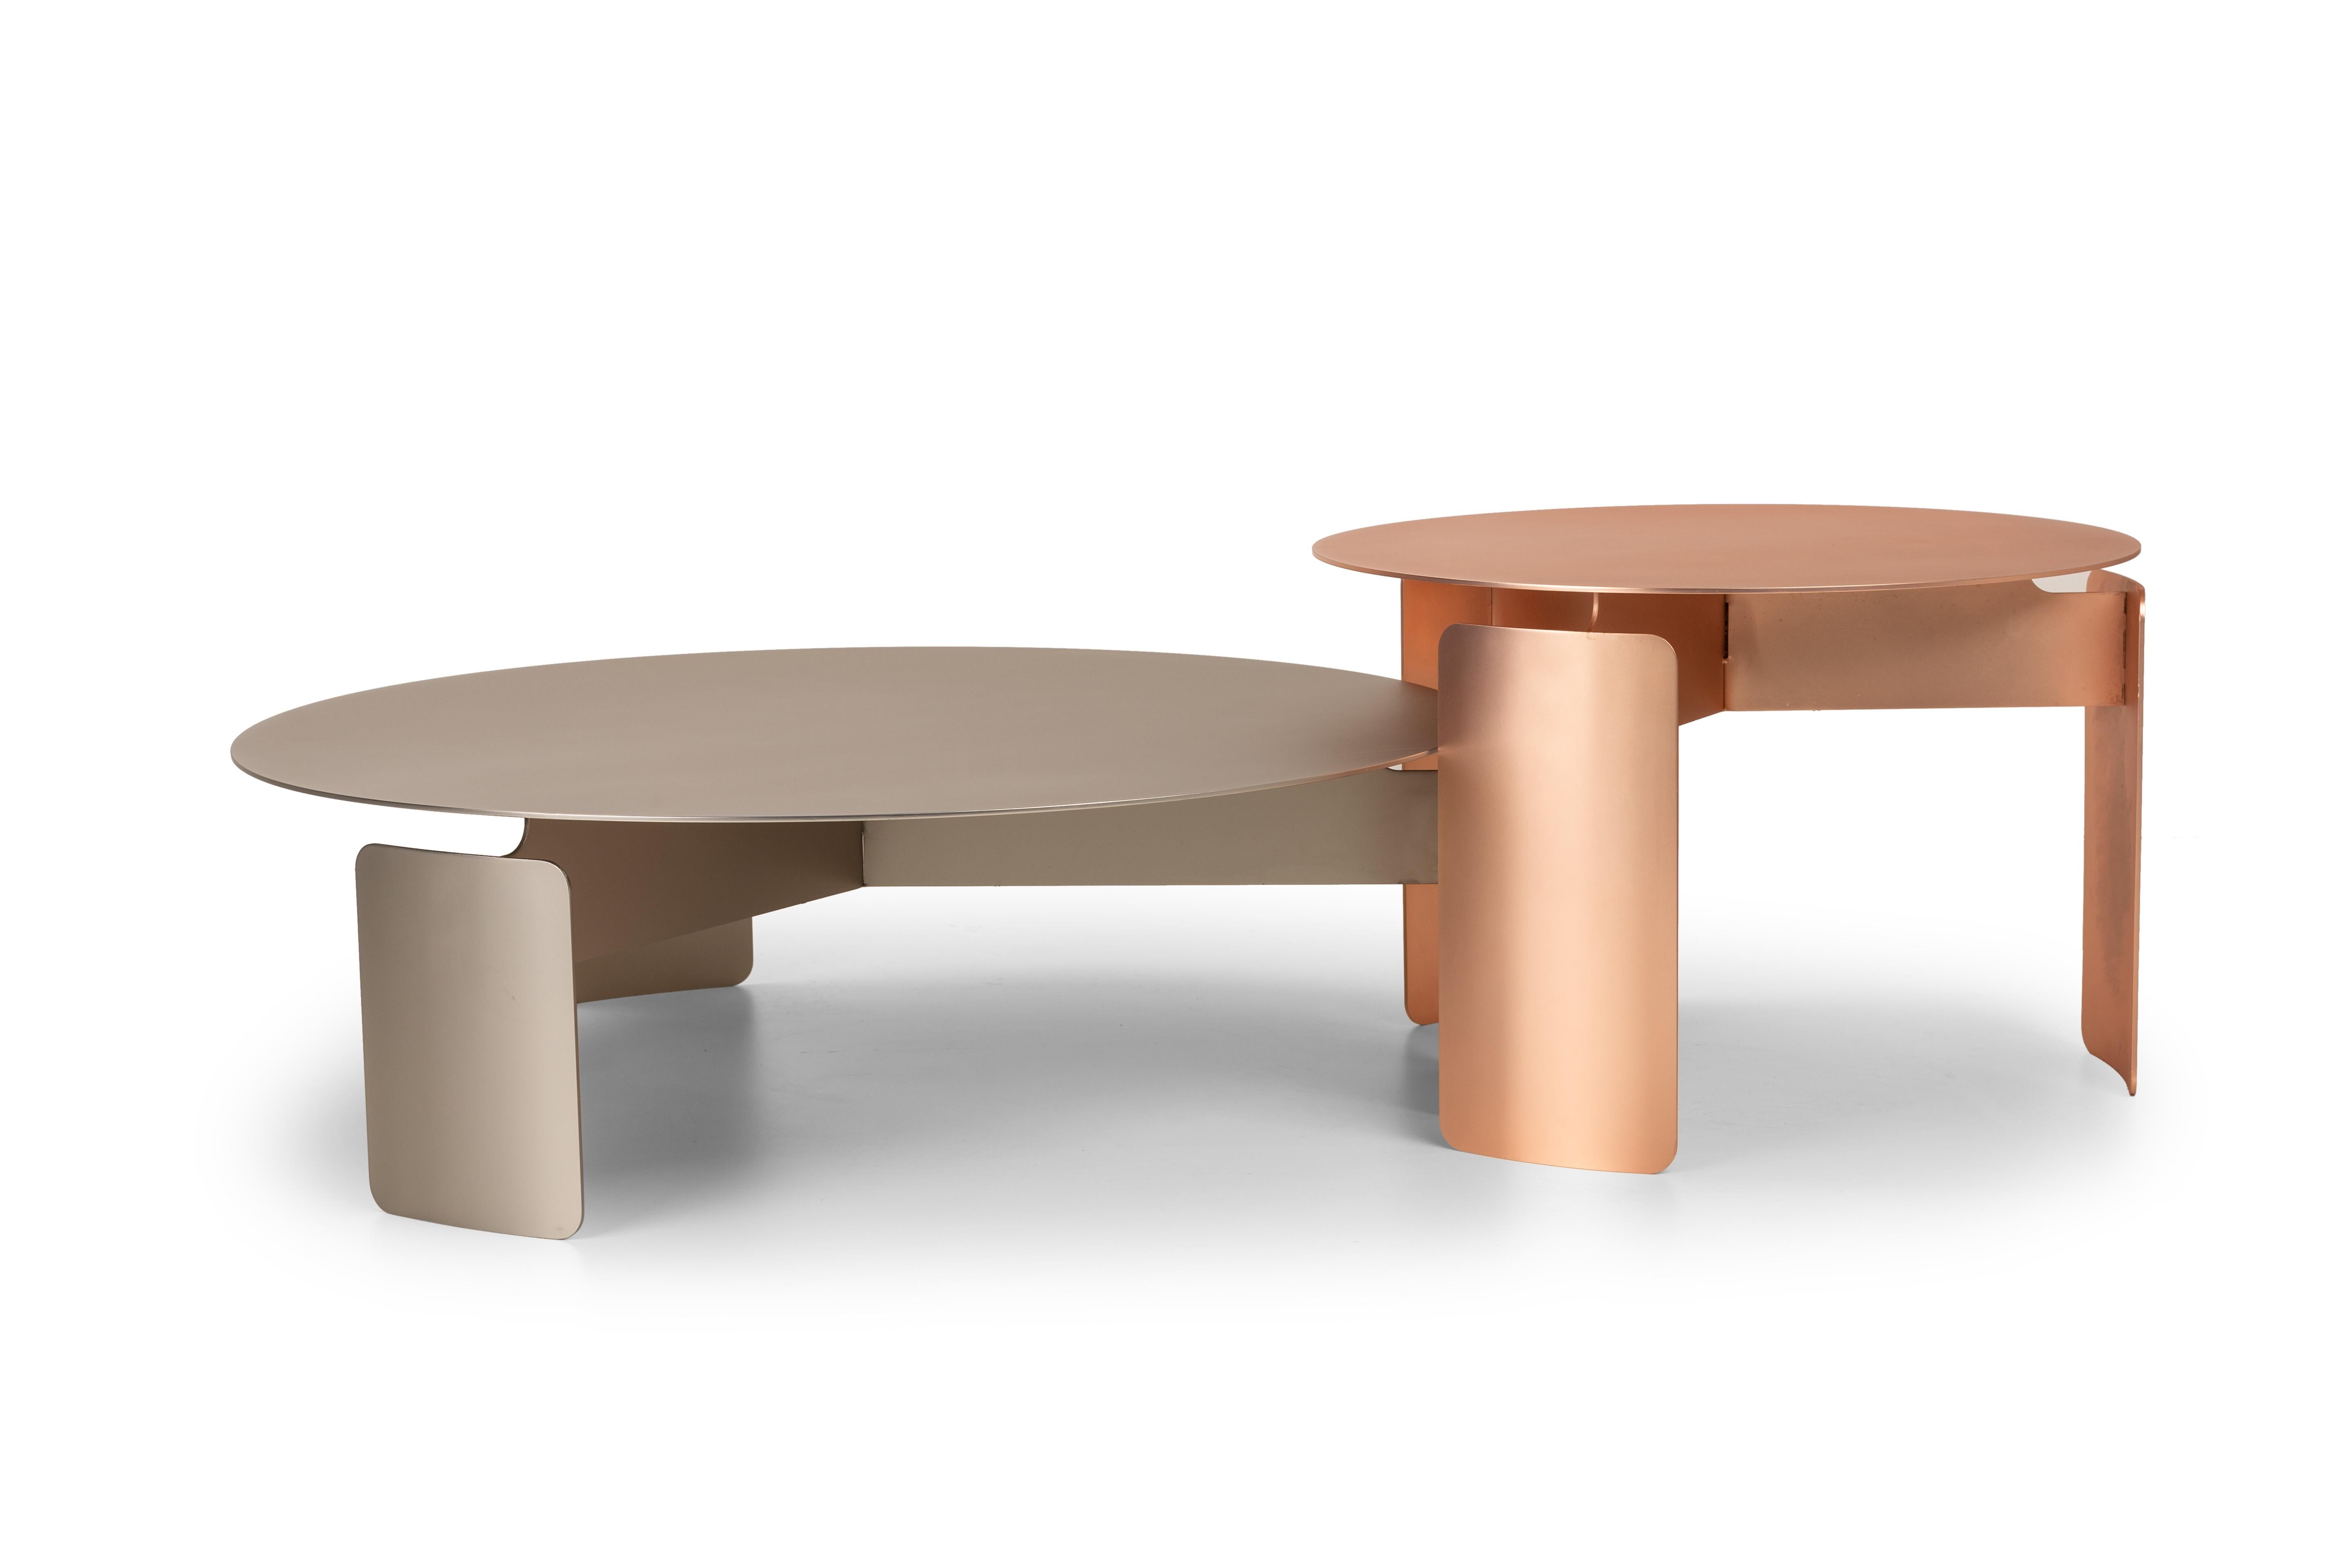 Set of 2 Shirudo Tables by Mingardo
Dimensions: D90 x H28 cm // D60 x H 40 cm
Materials: Stainless steel with pink gold finish
Stainless steel with matt cloudy bronze finish
Matt nickel plated stainless steel
Stainless steel with burnished iron